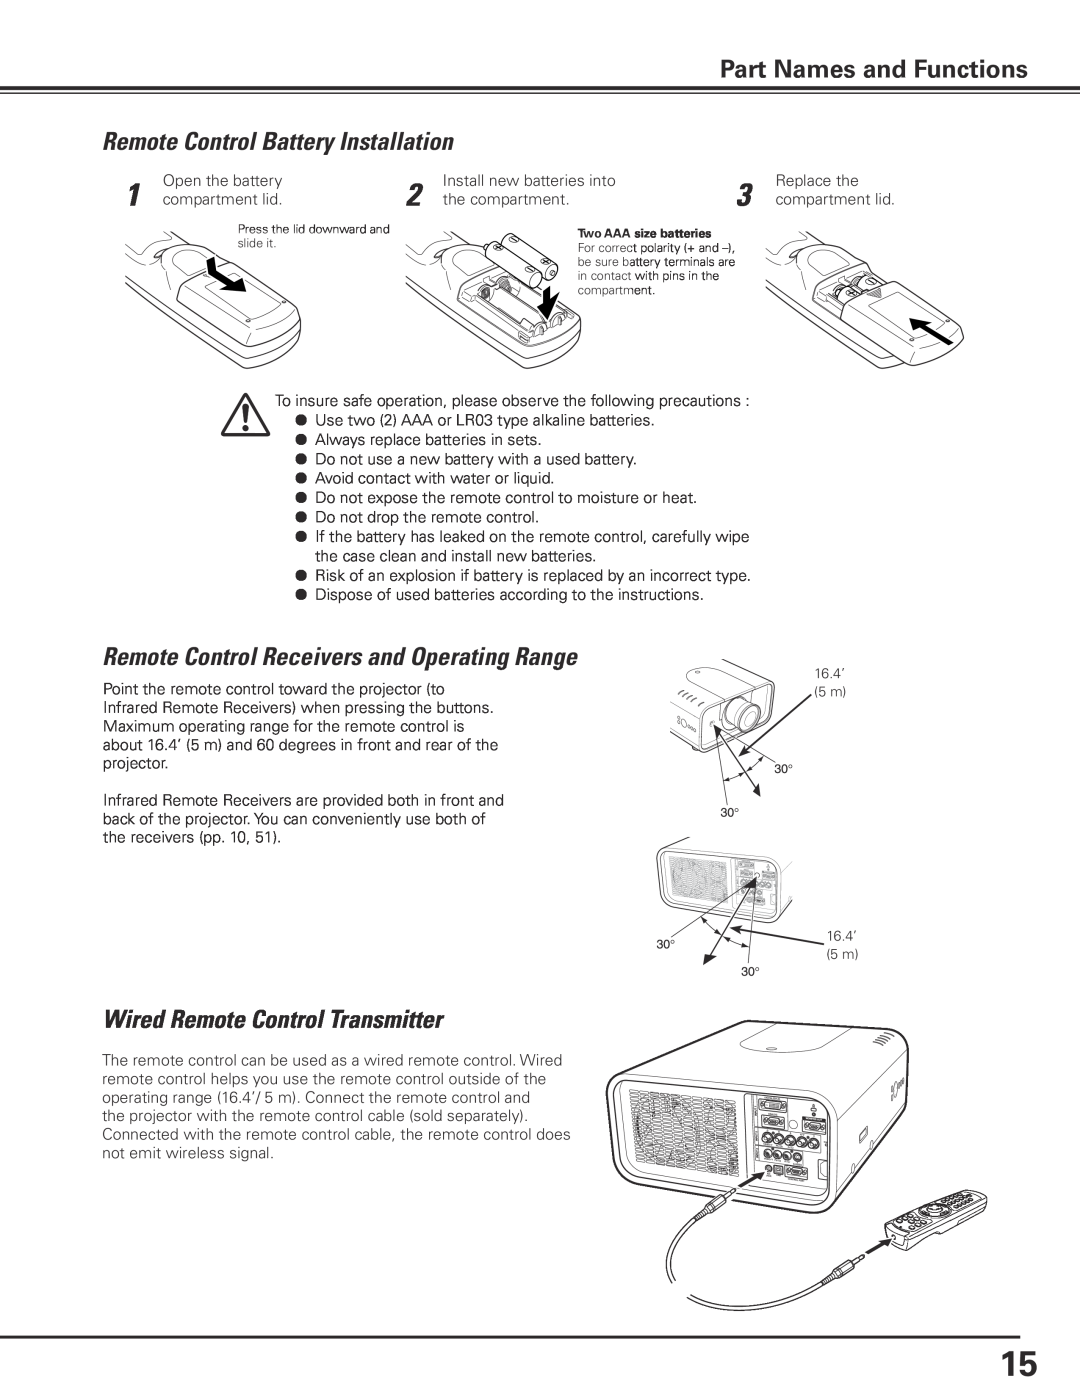 Sanyo PLC-XP100L, PLC-XP100BKL Remote Control Battery Installation, Remote Control Receivers and Operating Range 